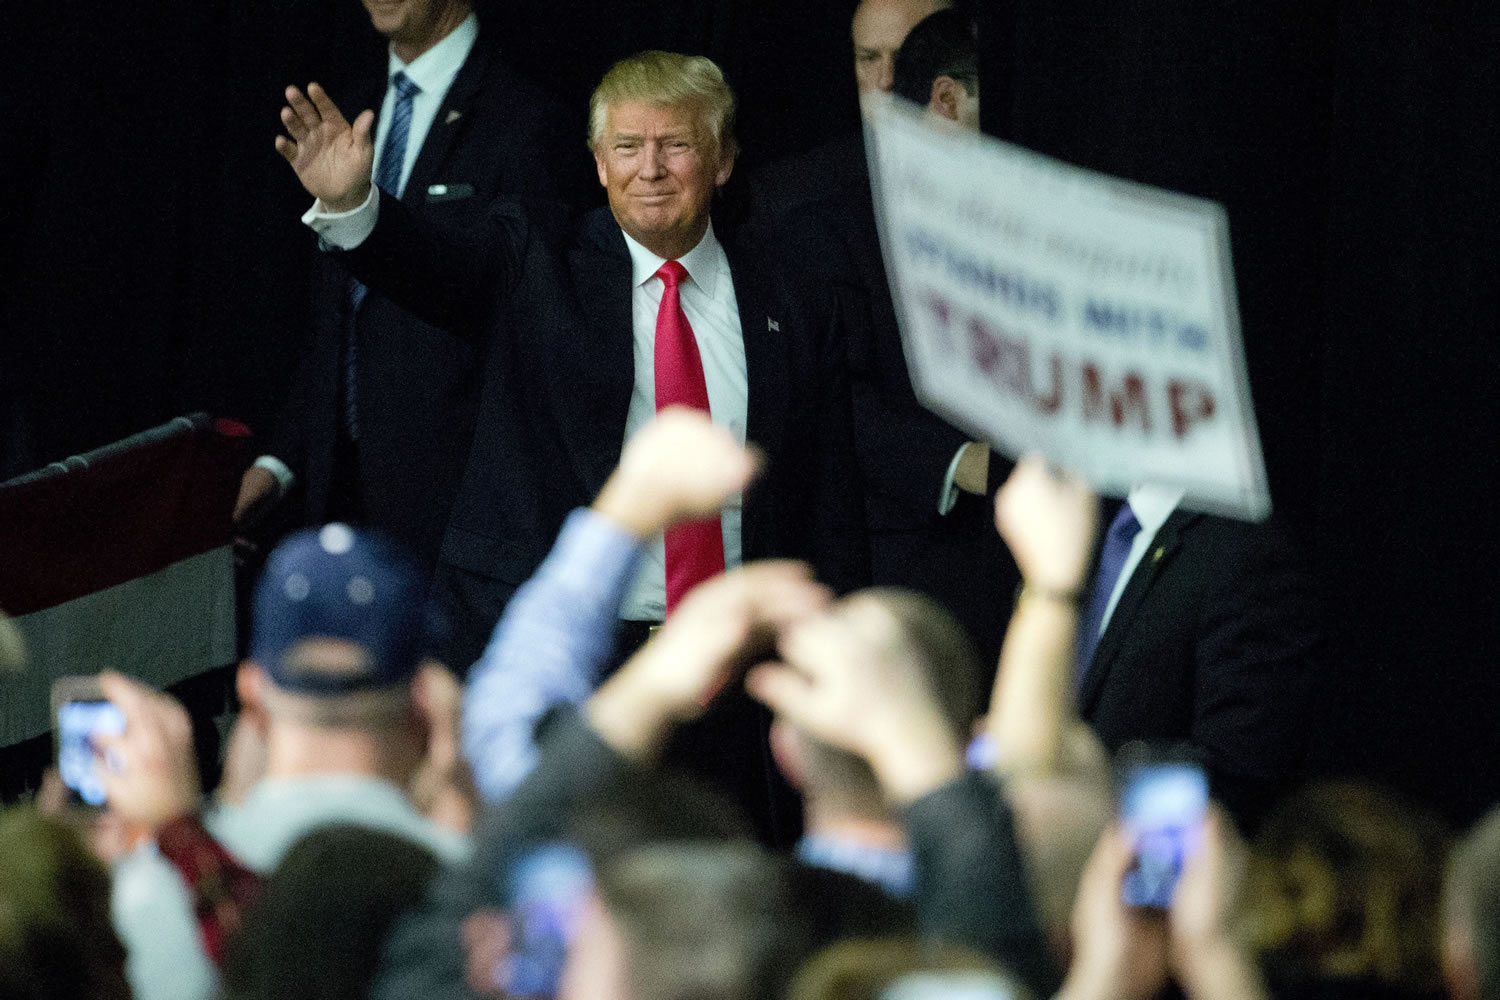 Republican presidential candidate Donald Trump waves during a campaign stop Tuesday in Milford, N.H.